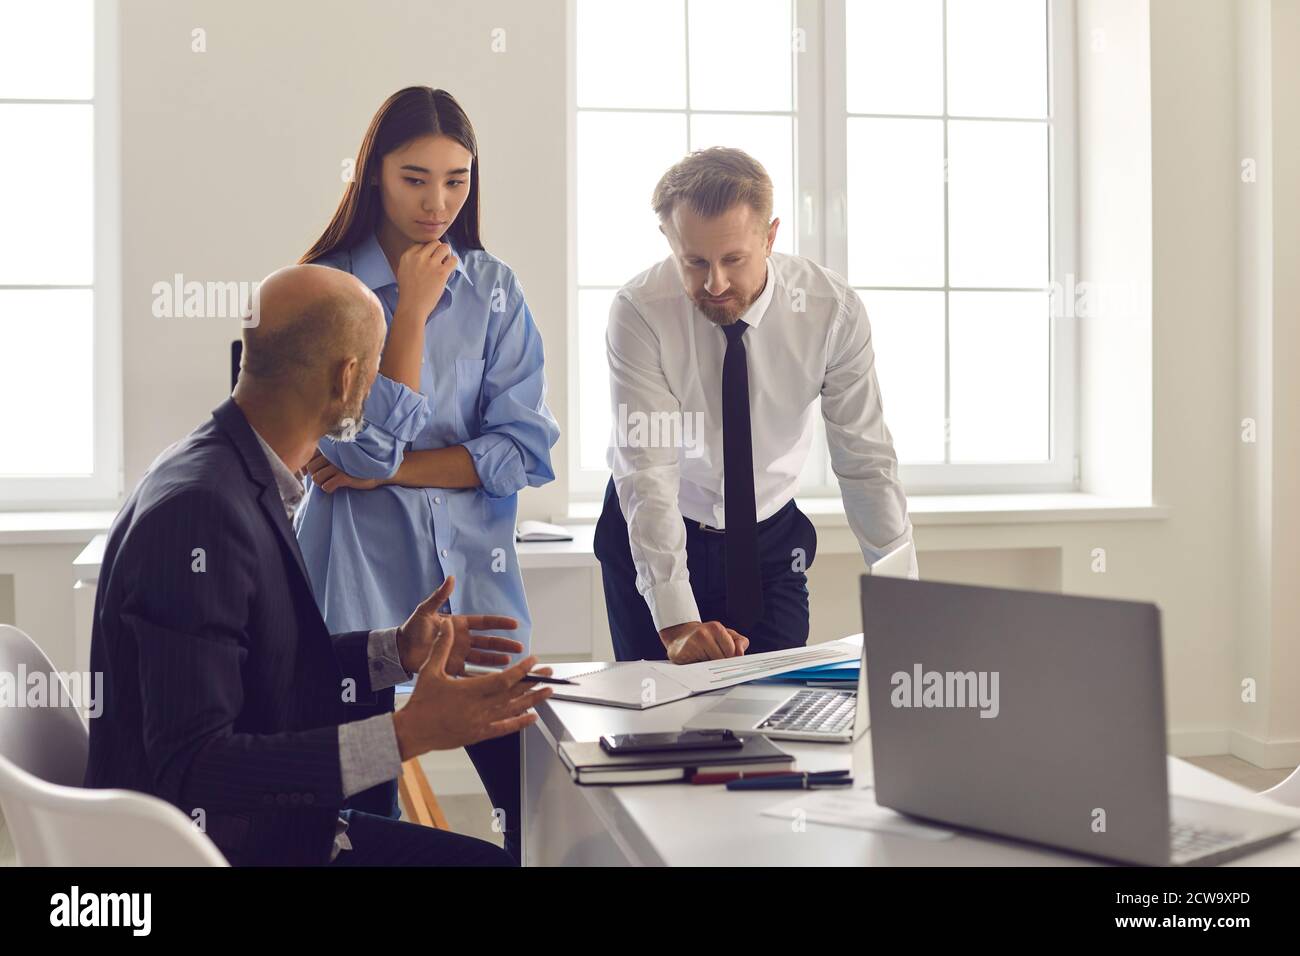 Serious employees listening to boss's advice and instructions while solving work project problem Stock Photo